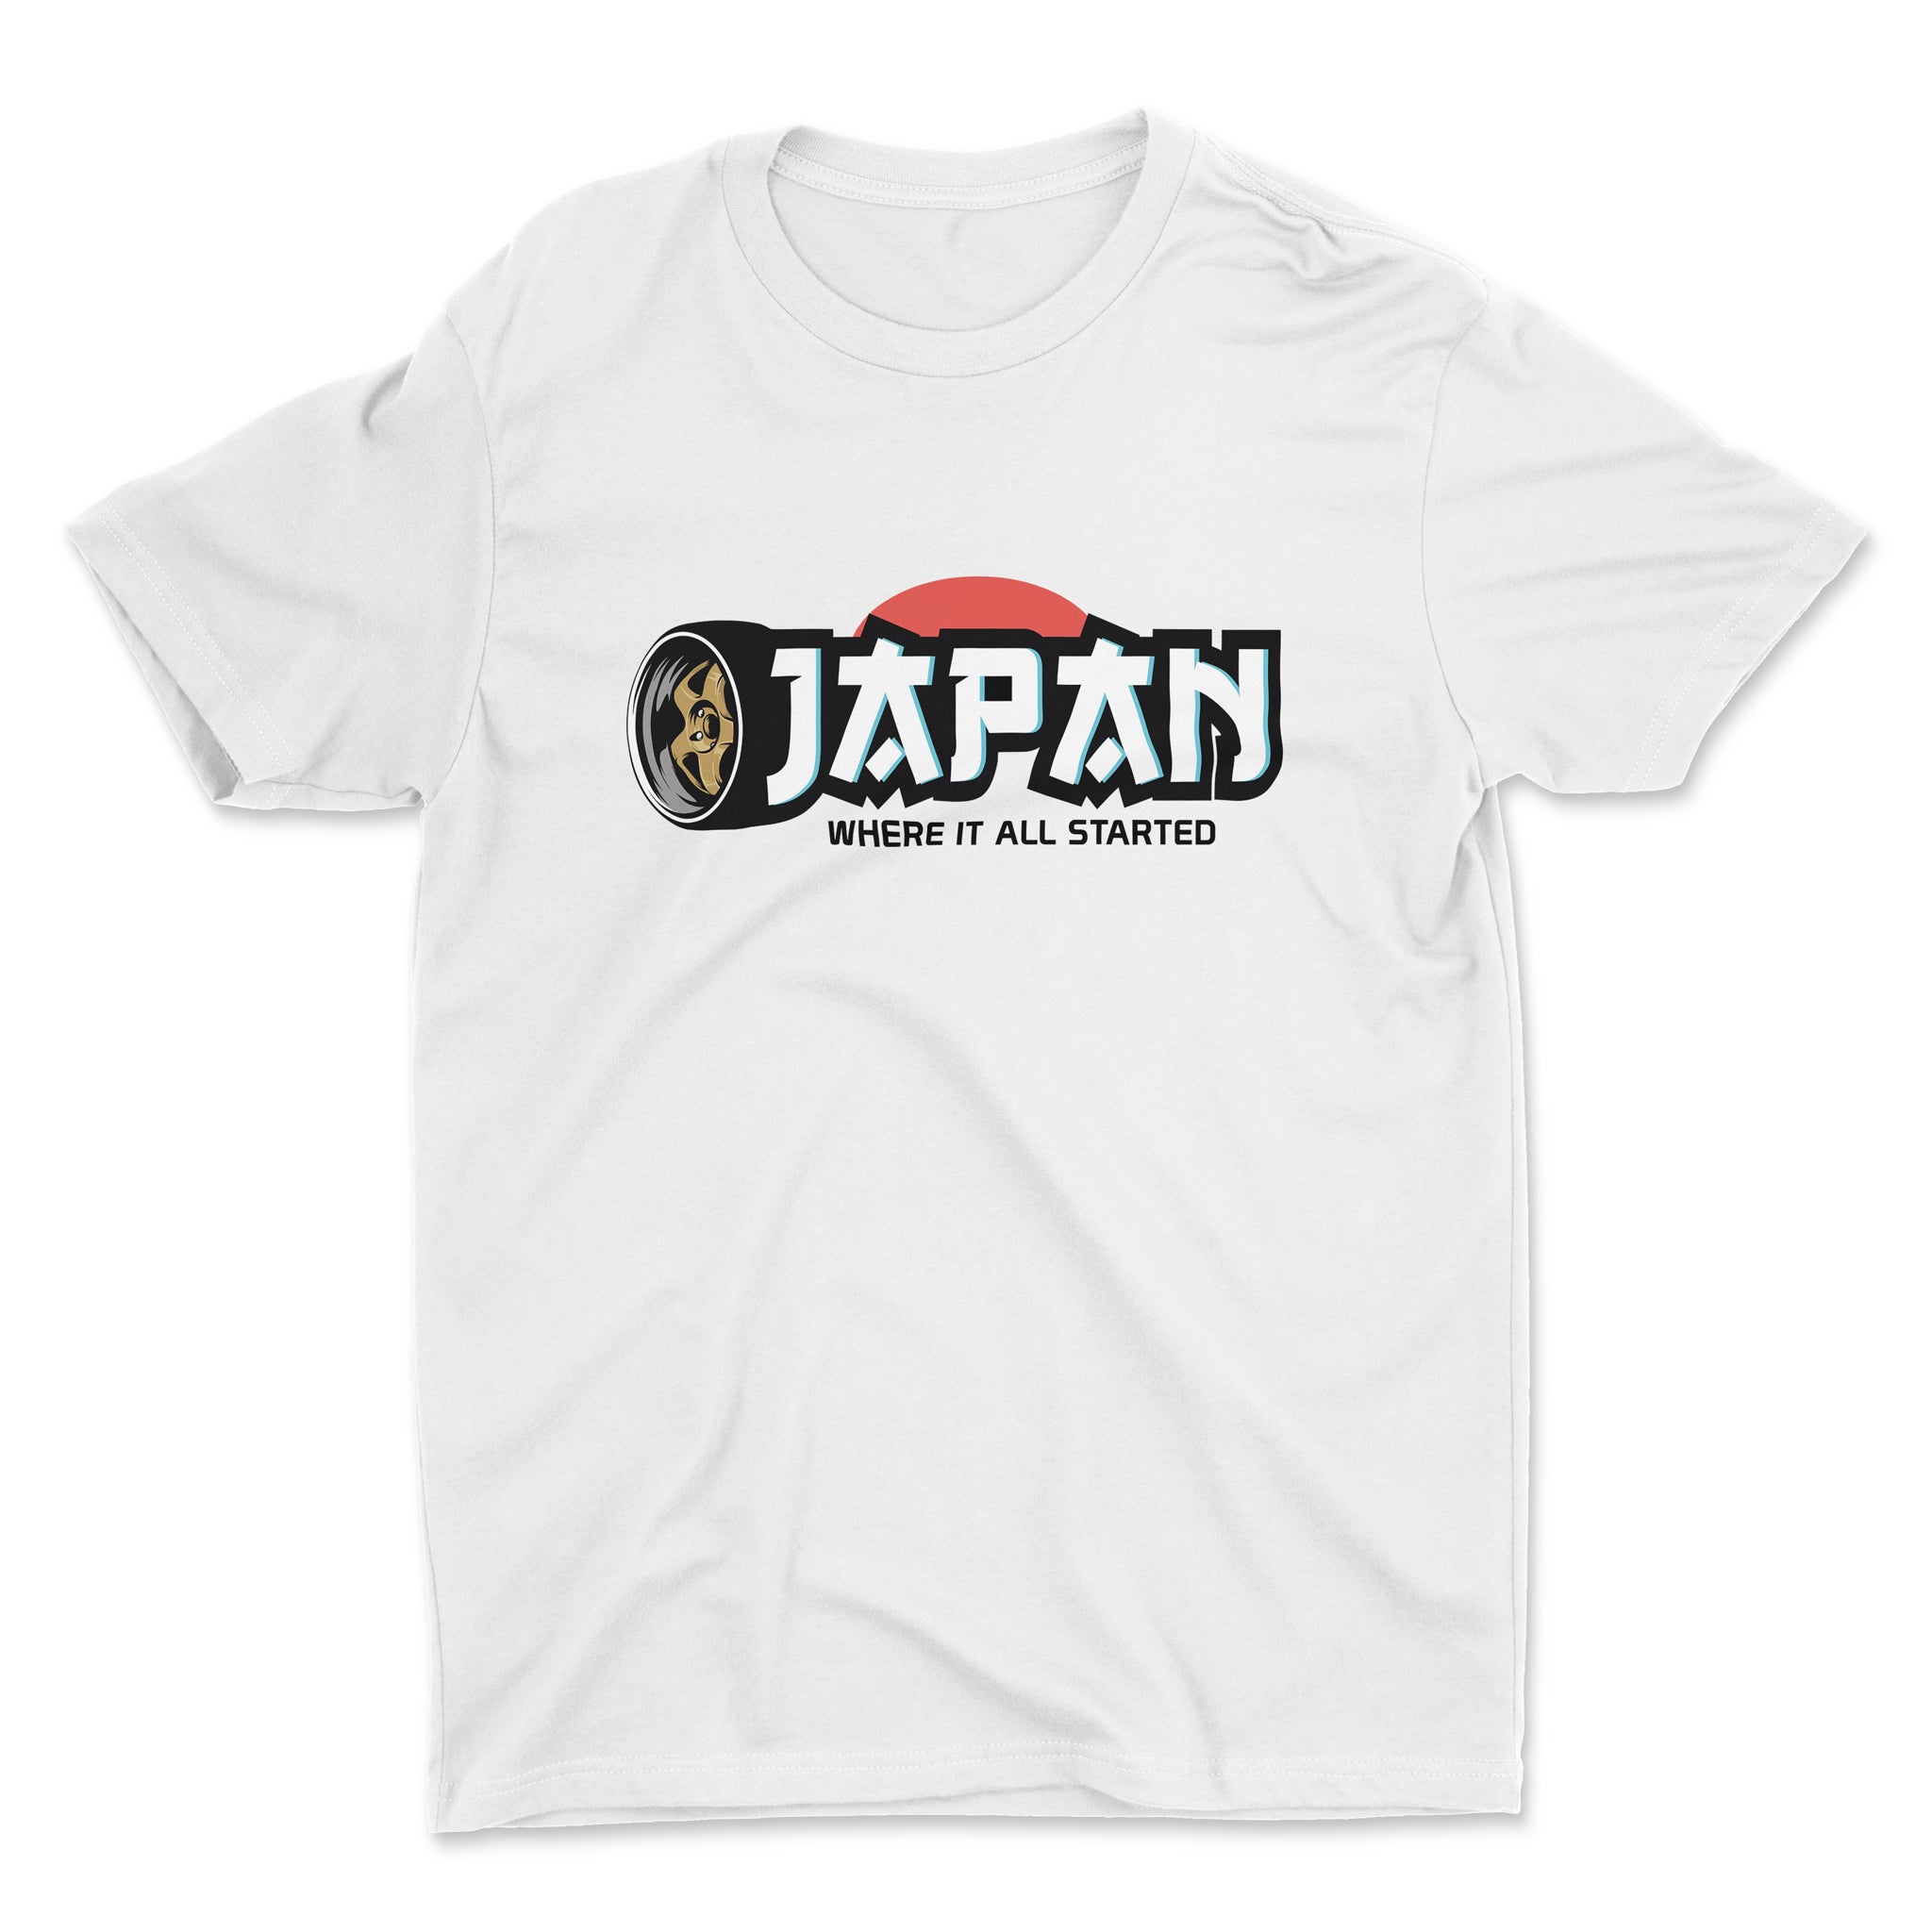 Japan - Where It All Started - Car T-Shirt - White Mockup